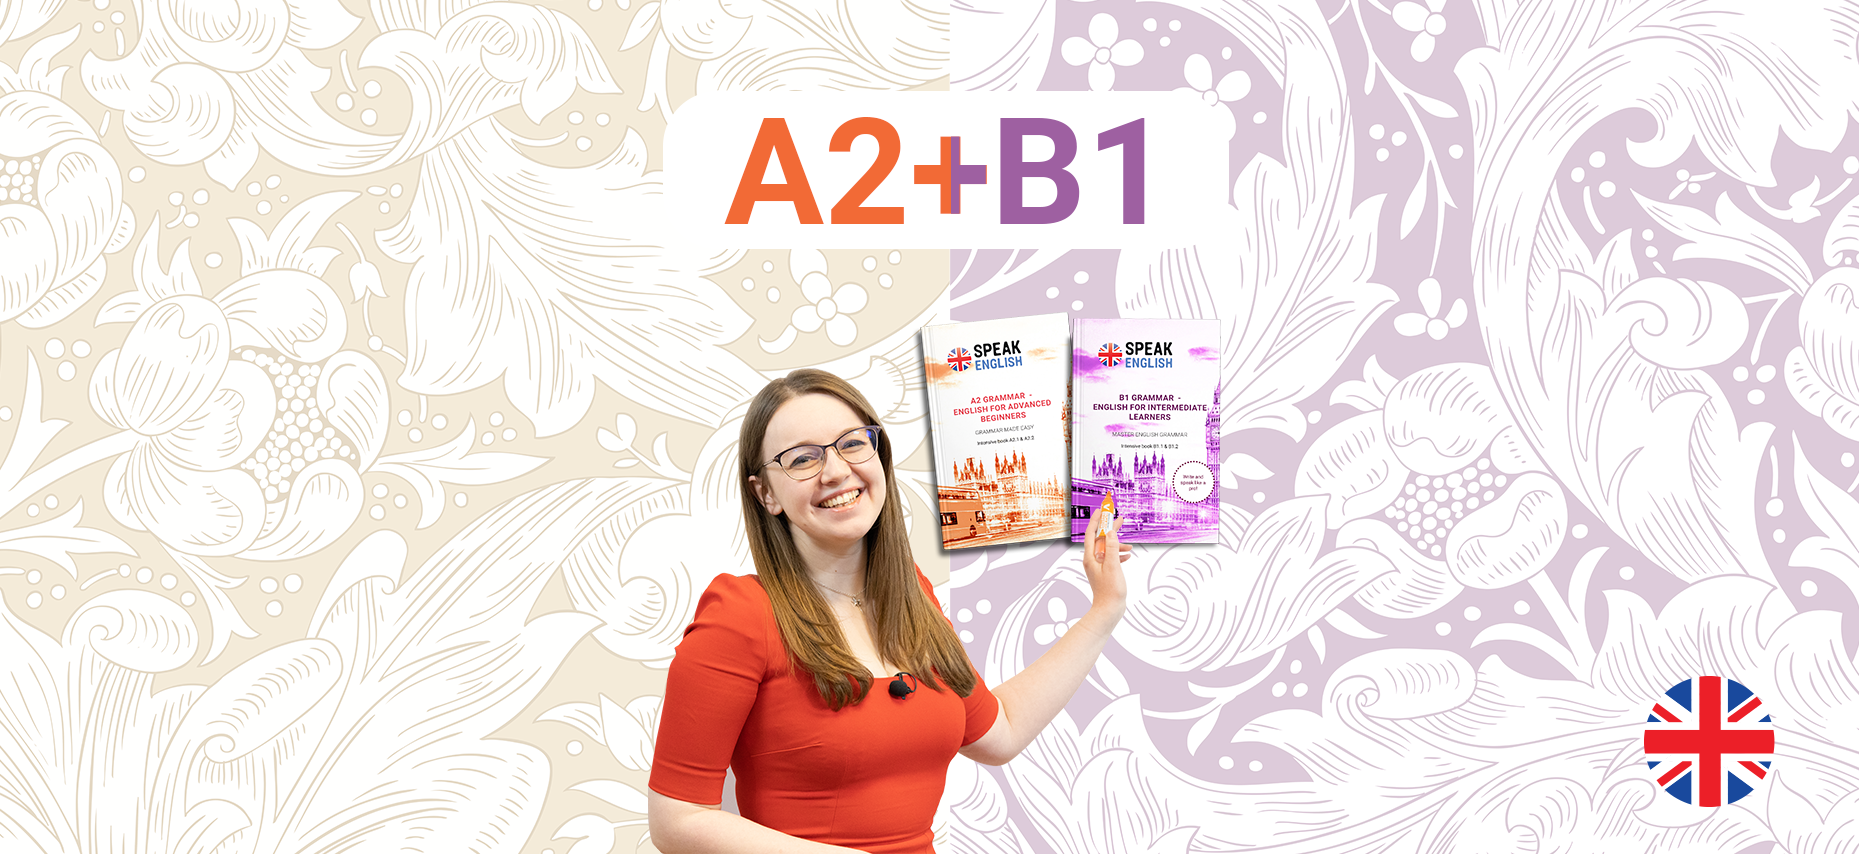 A2 and B1 beginner to intermediate English course with teacher guidance and books free of charge